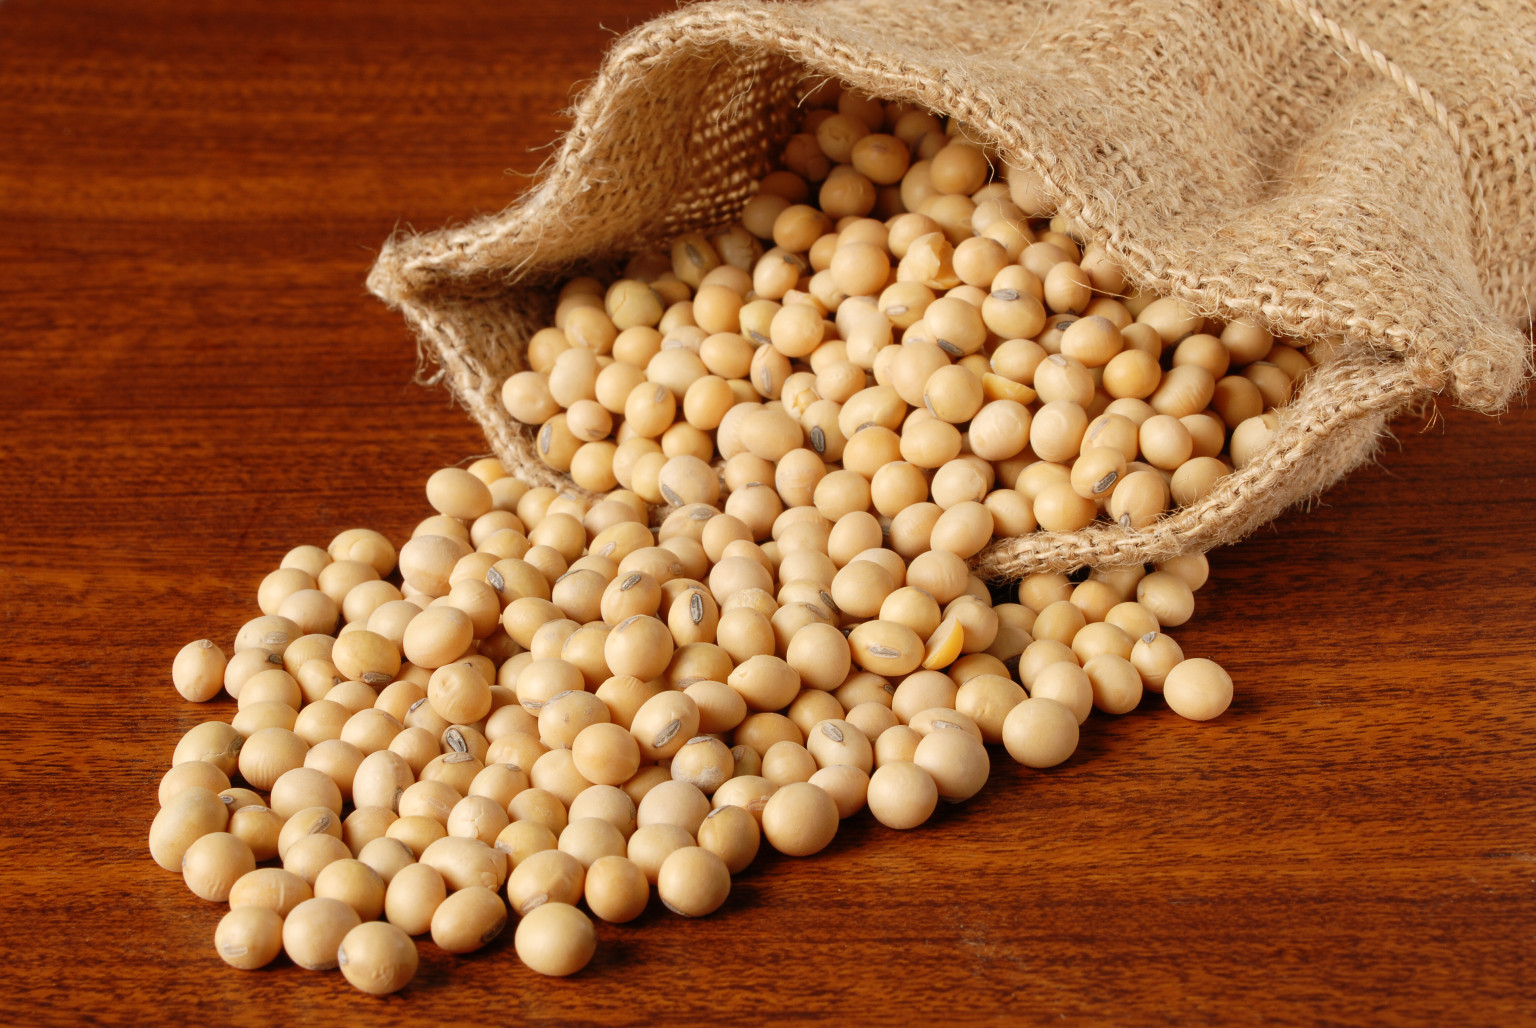 Undeniable Health Benefits of Soybeans